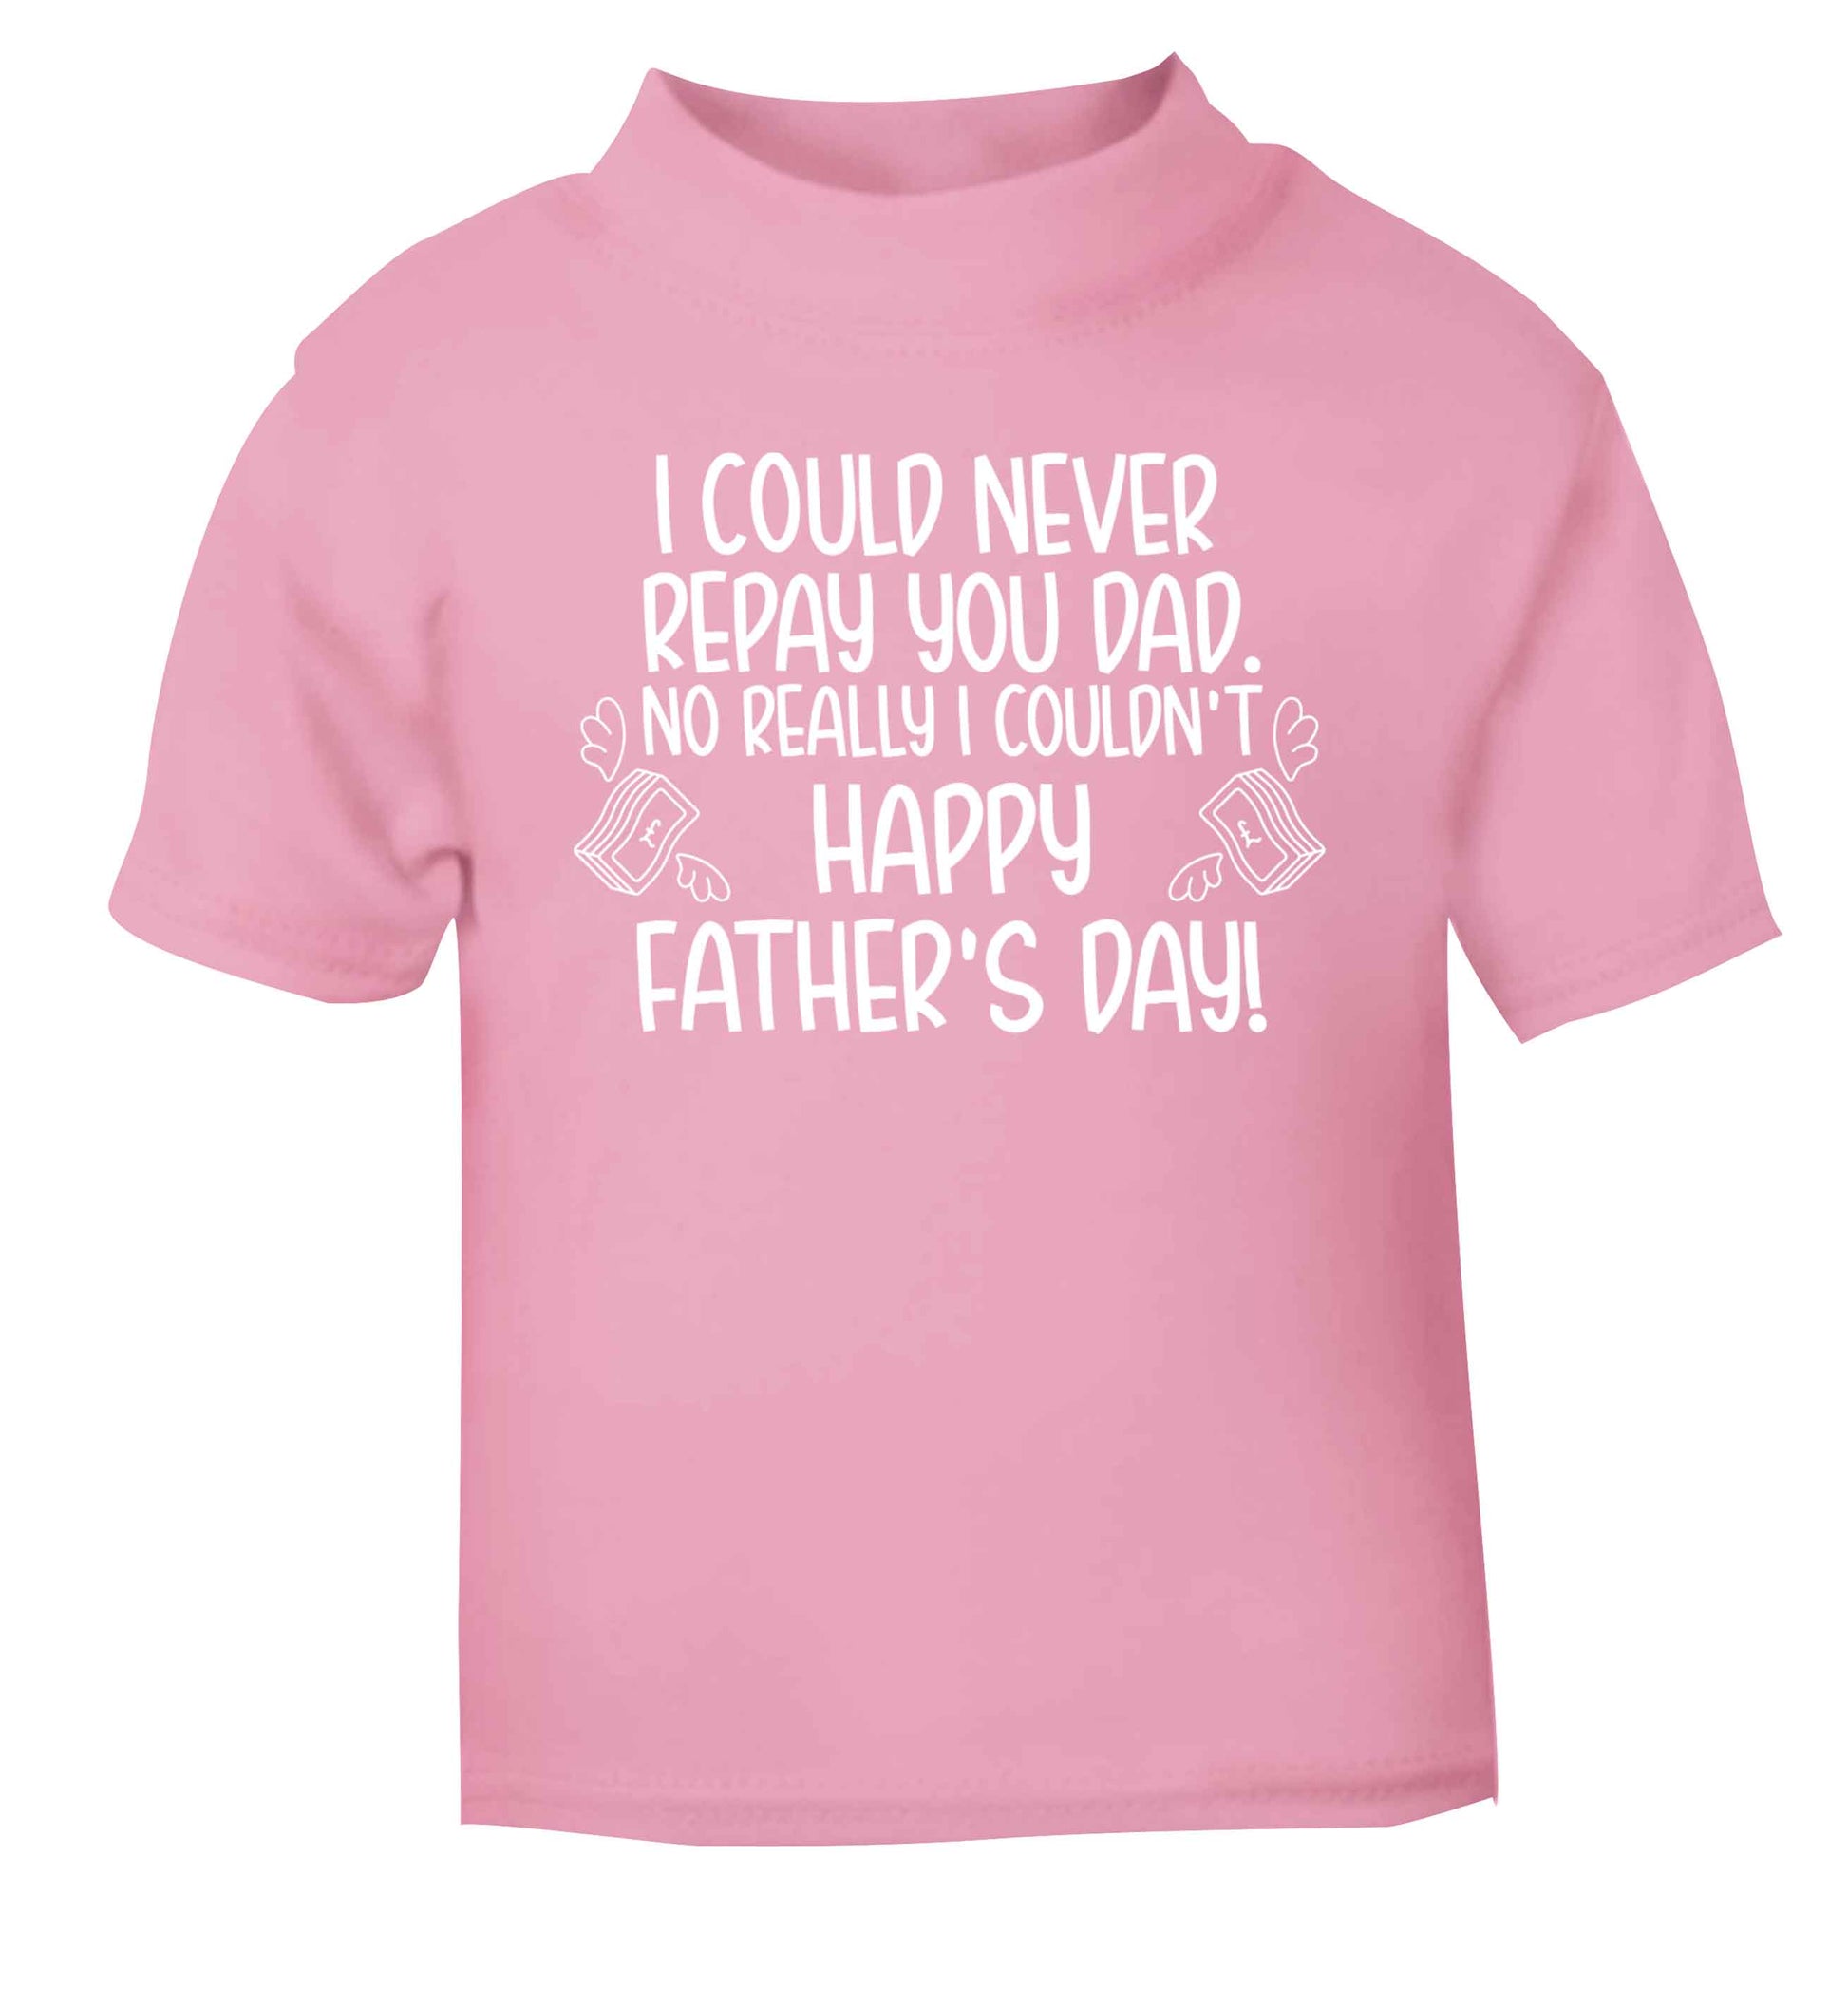 I could never repay you dad. No I really couldn't happy Father's day! light pink baby toddler Tshirt 2 Years